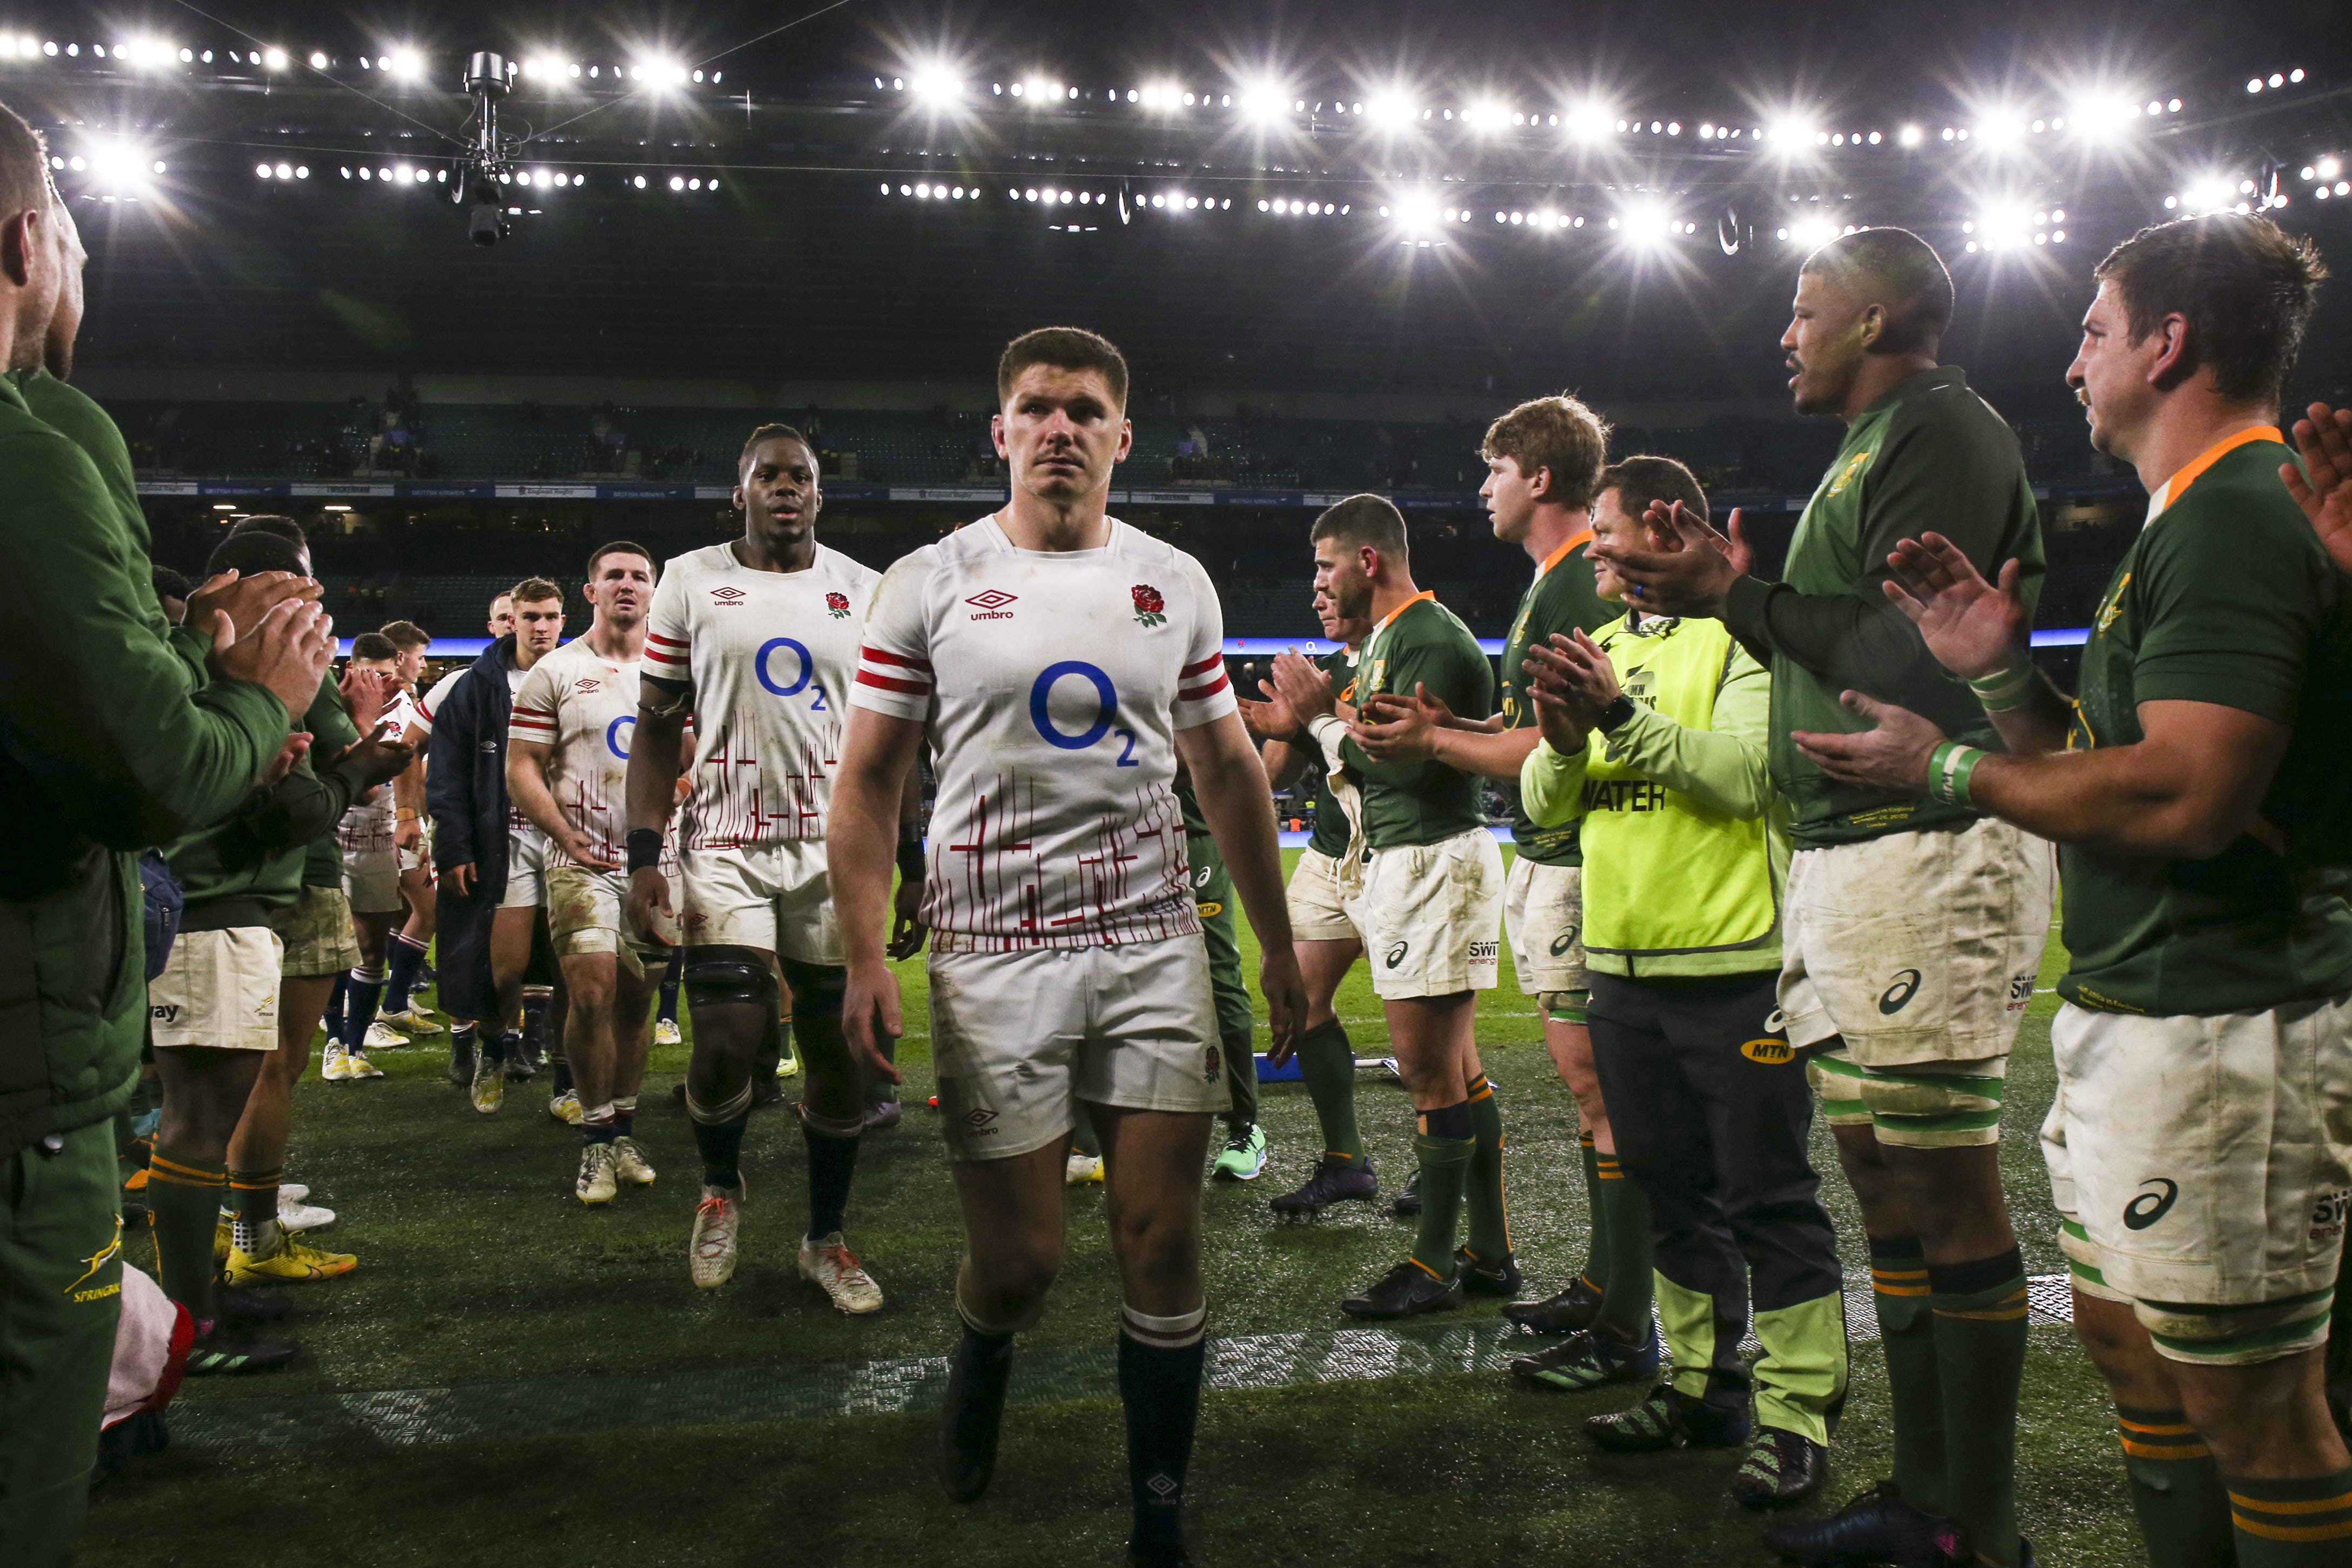 The last time the sides met, in November, an abject England were routed by South Africa at Twickenham